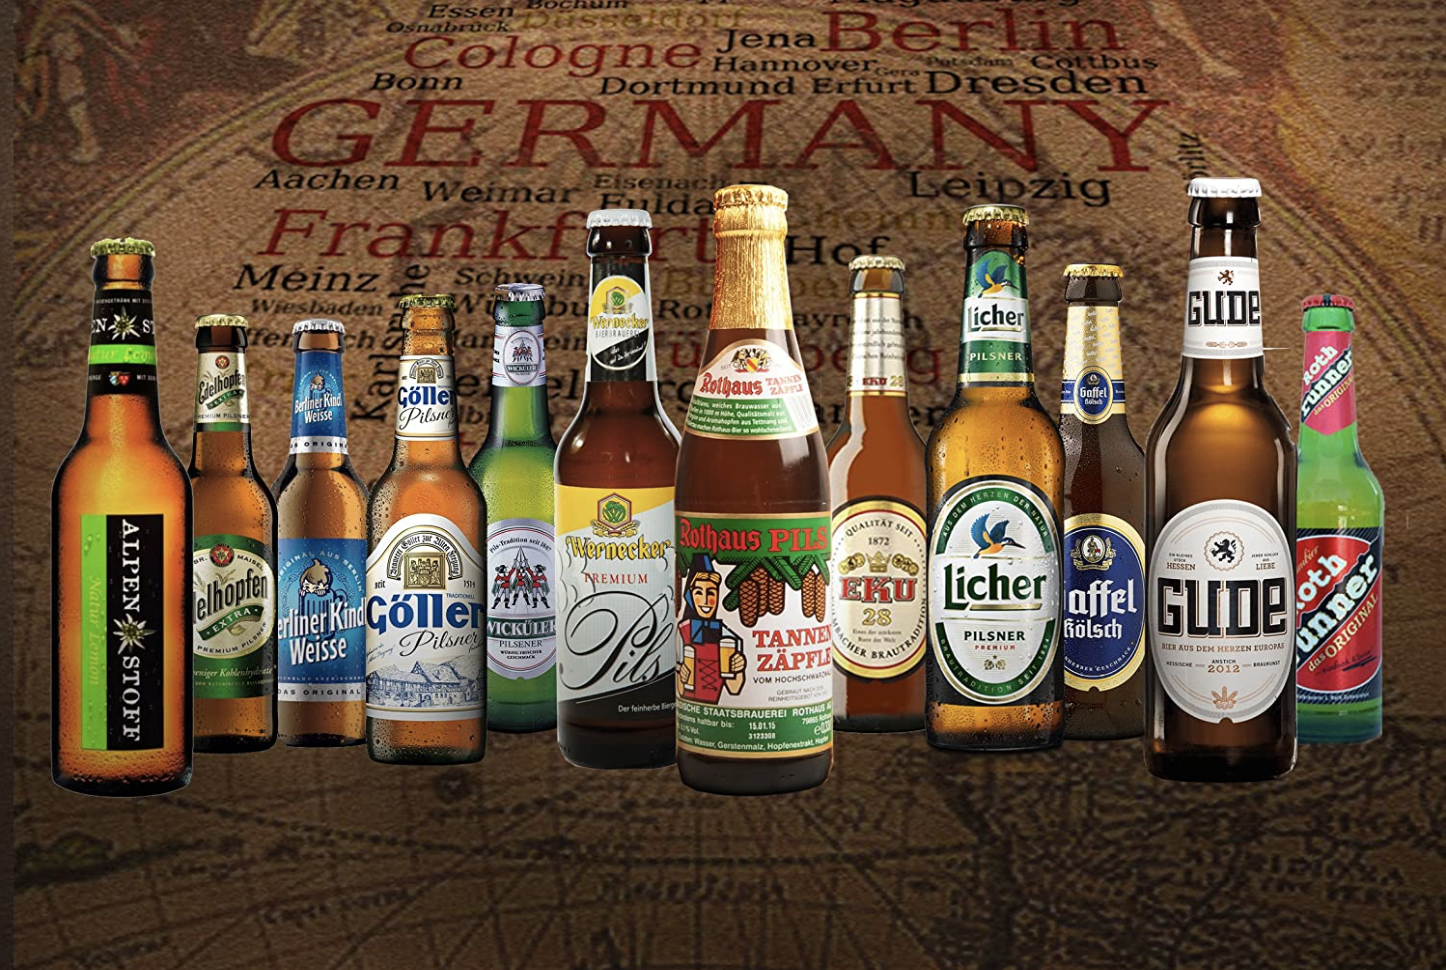 German Beer and Beer Culture is famous for a good reason - here are some of the most popular beers.